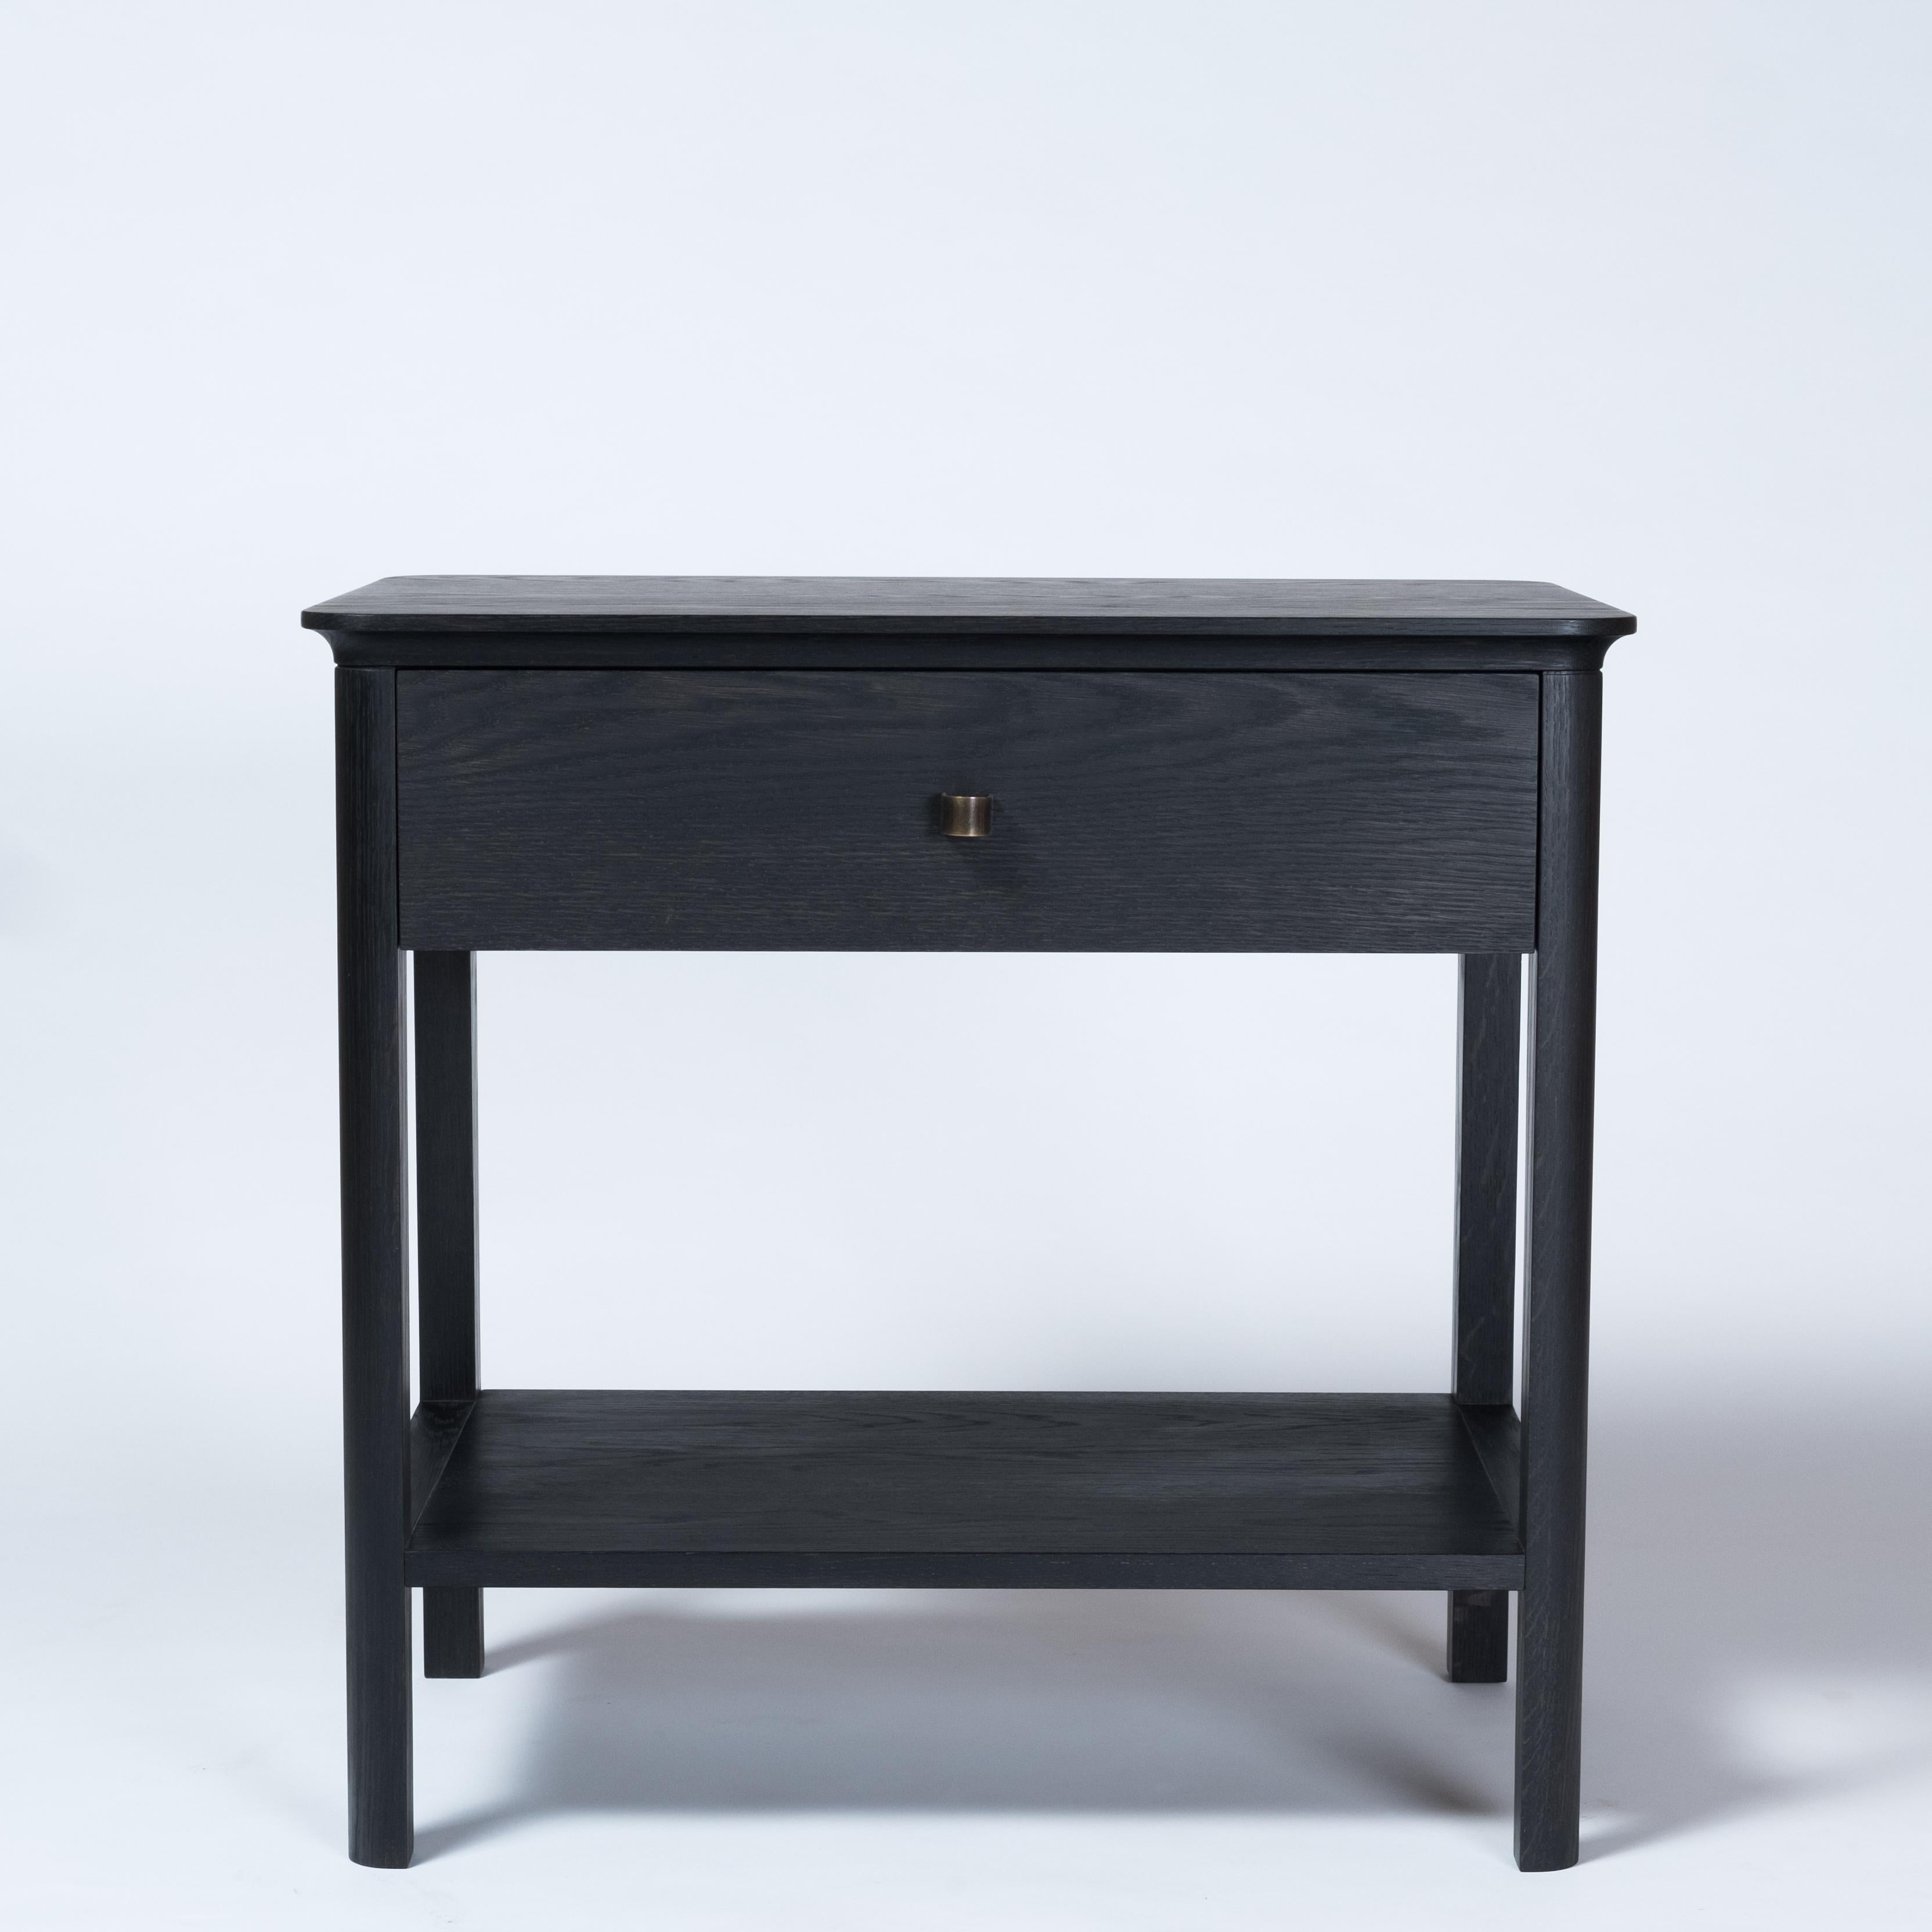 The Basin nightstand combines traditional construction with restrained and refined detailing. The table offers a myriad of uses from a nightstand to a side table. A dovetailed drawer offer concealed storage along with a shelf below. The custom made